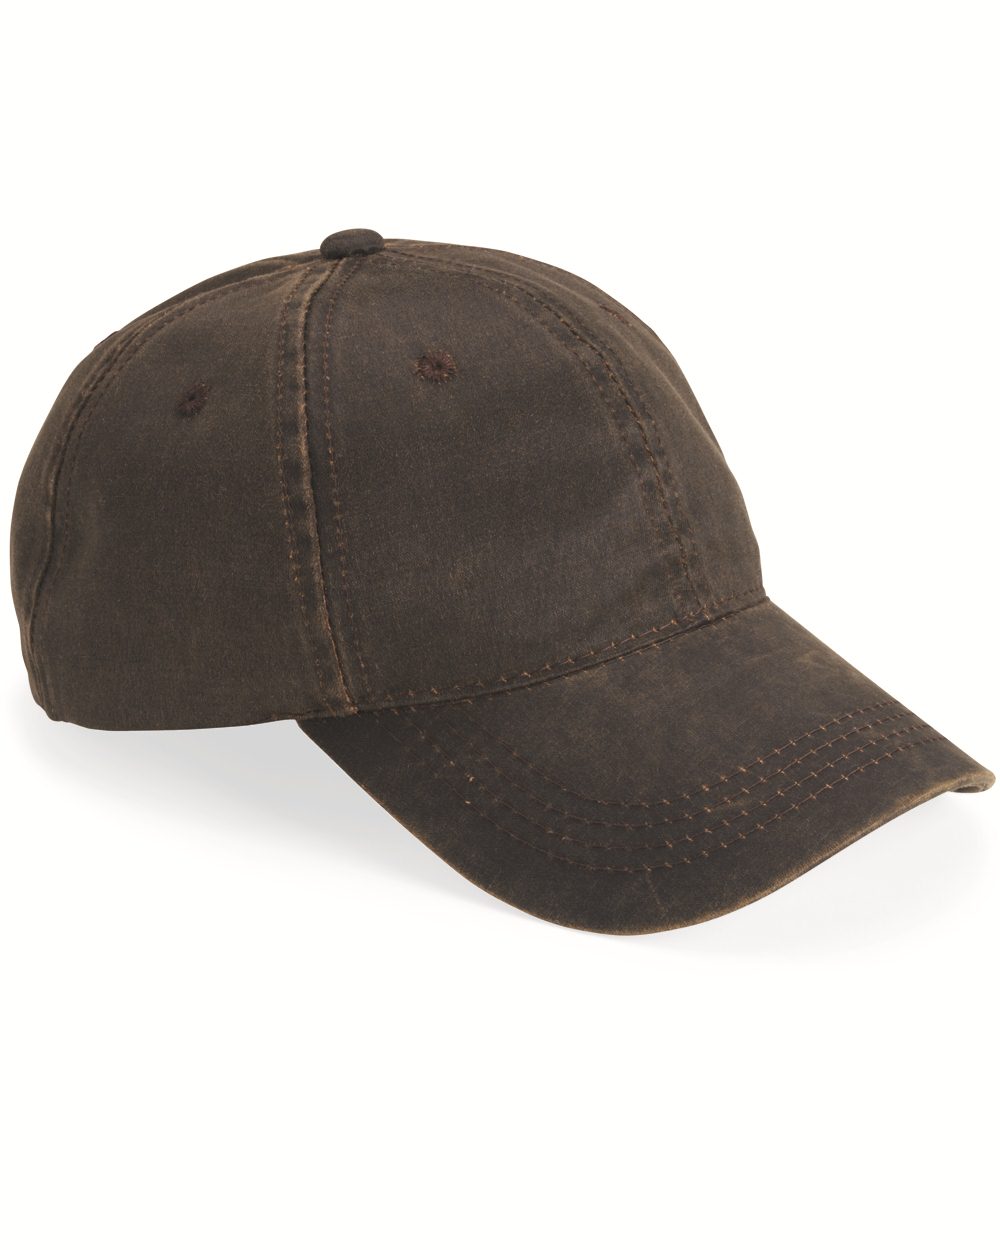 Outdoor Cap HPD605-Weathered Cotton Twill Cap